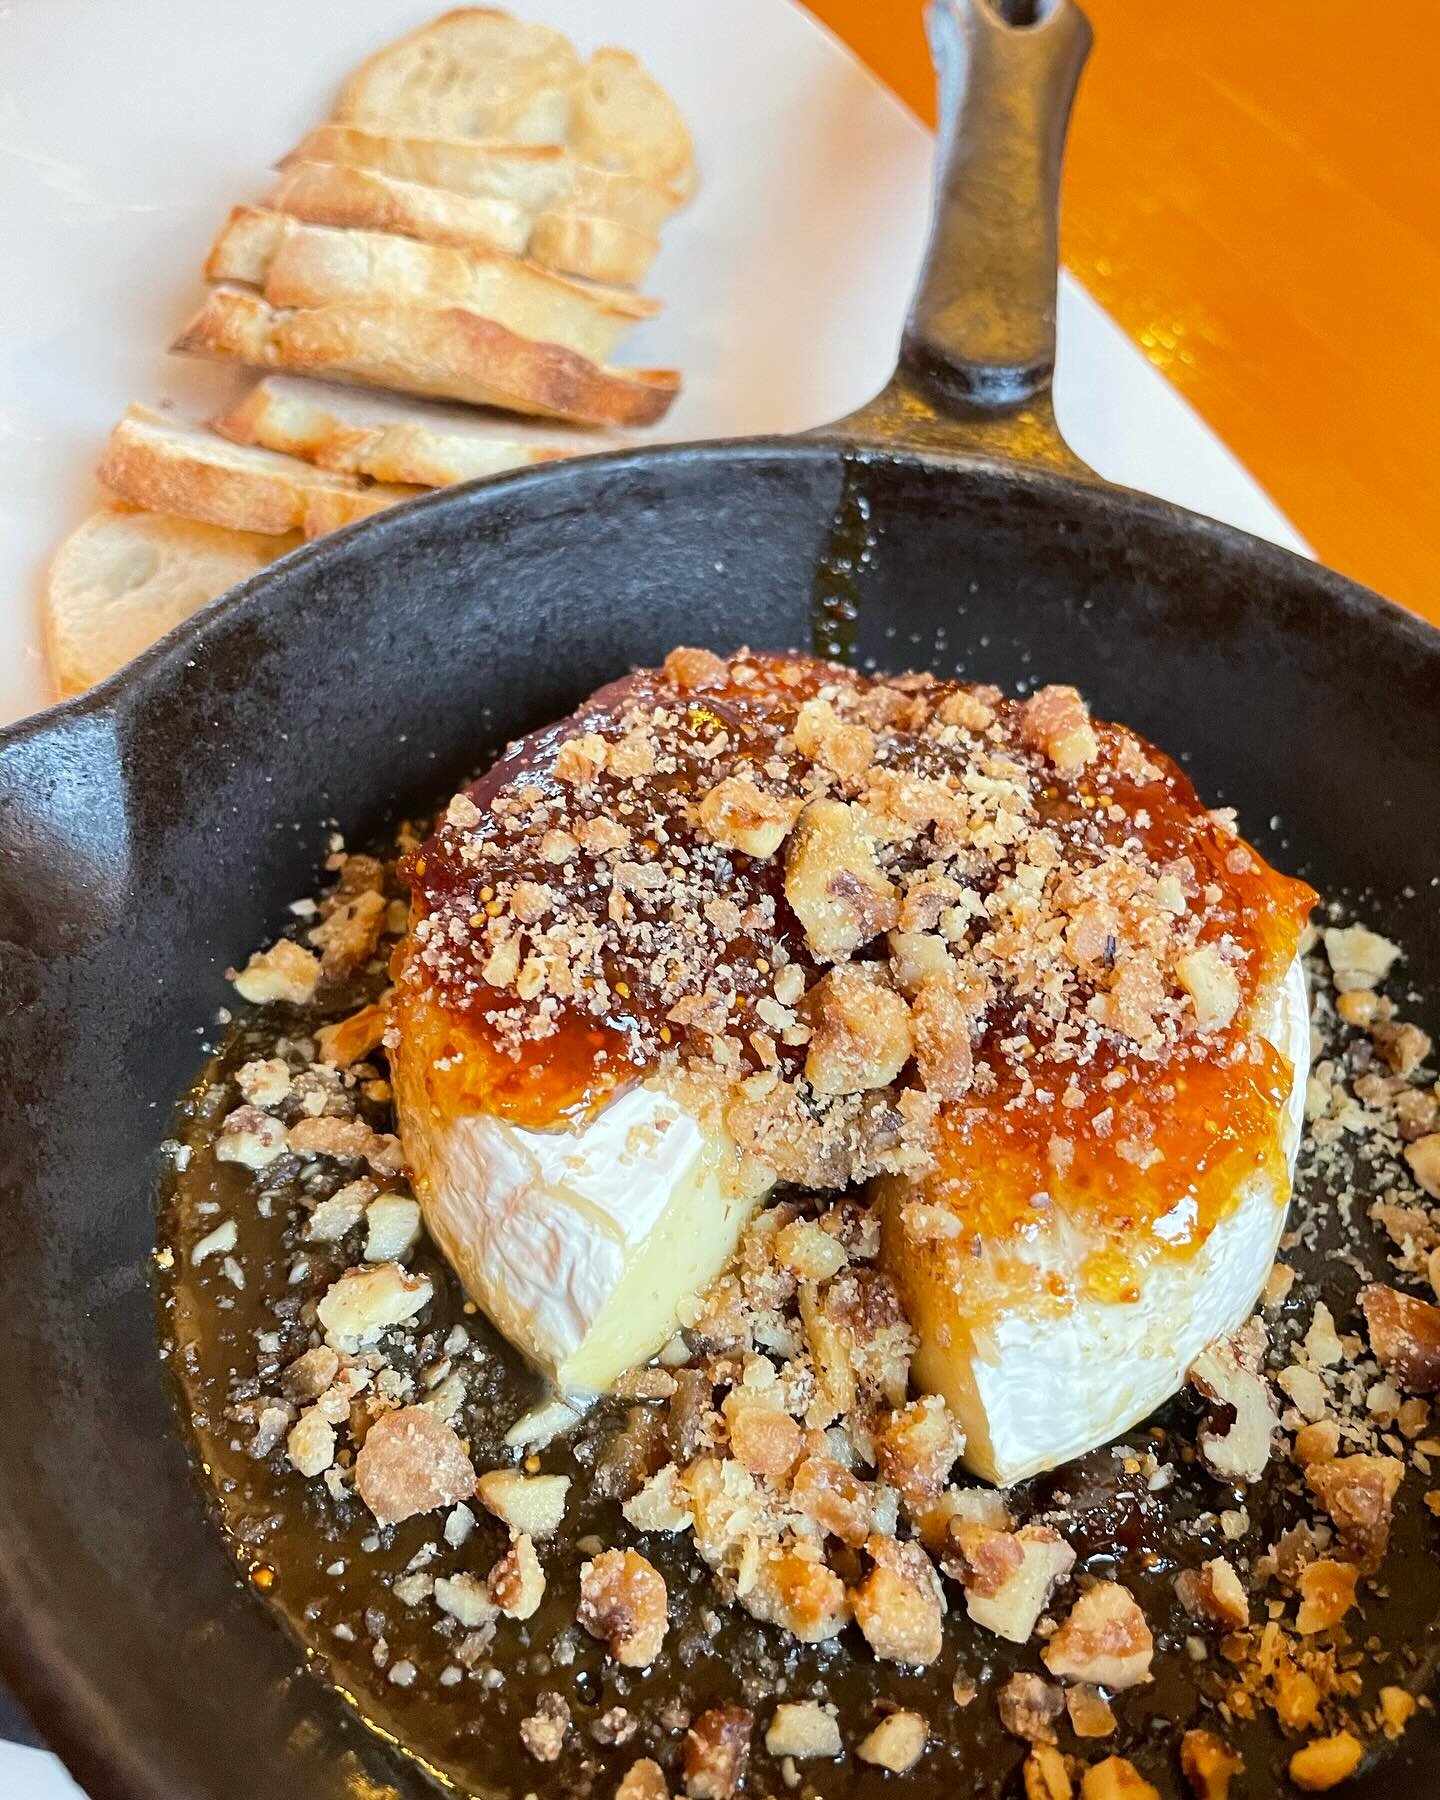 What is figgy pudding? We&rsquo;re not exactly sure, but we do know what figs are, and they&rsquo;re delicious! 

Baked Brie - warm, soft Brie cheese topped with fig jam, toasted candied walnuts, crostini | 15

Duck w/ Fig Sauce - pan-seared duck bre